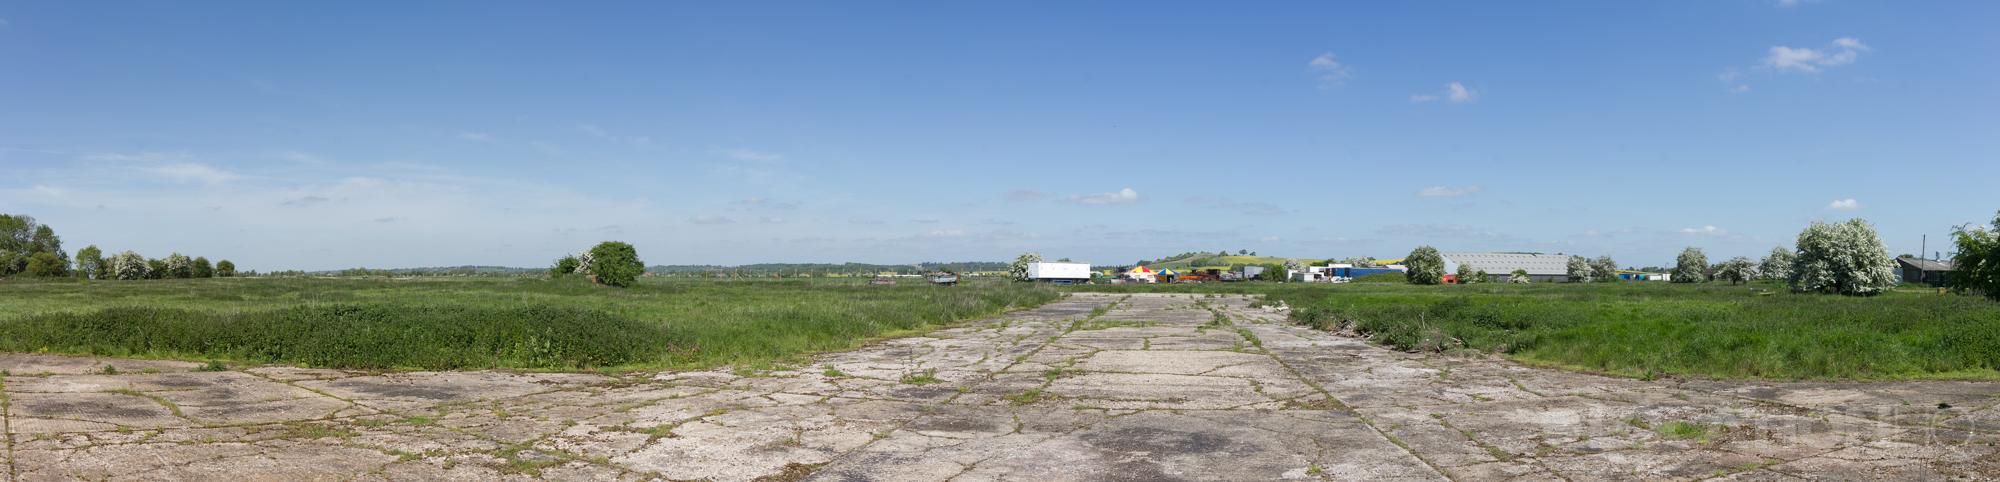 The Ex-Military Base image 2